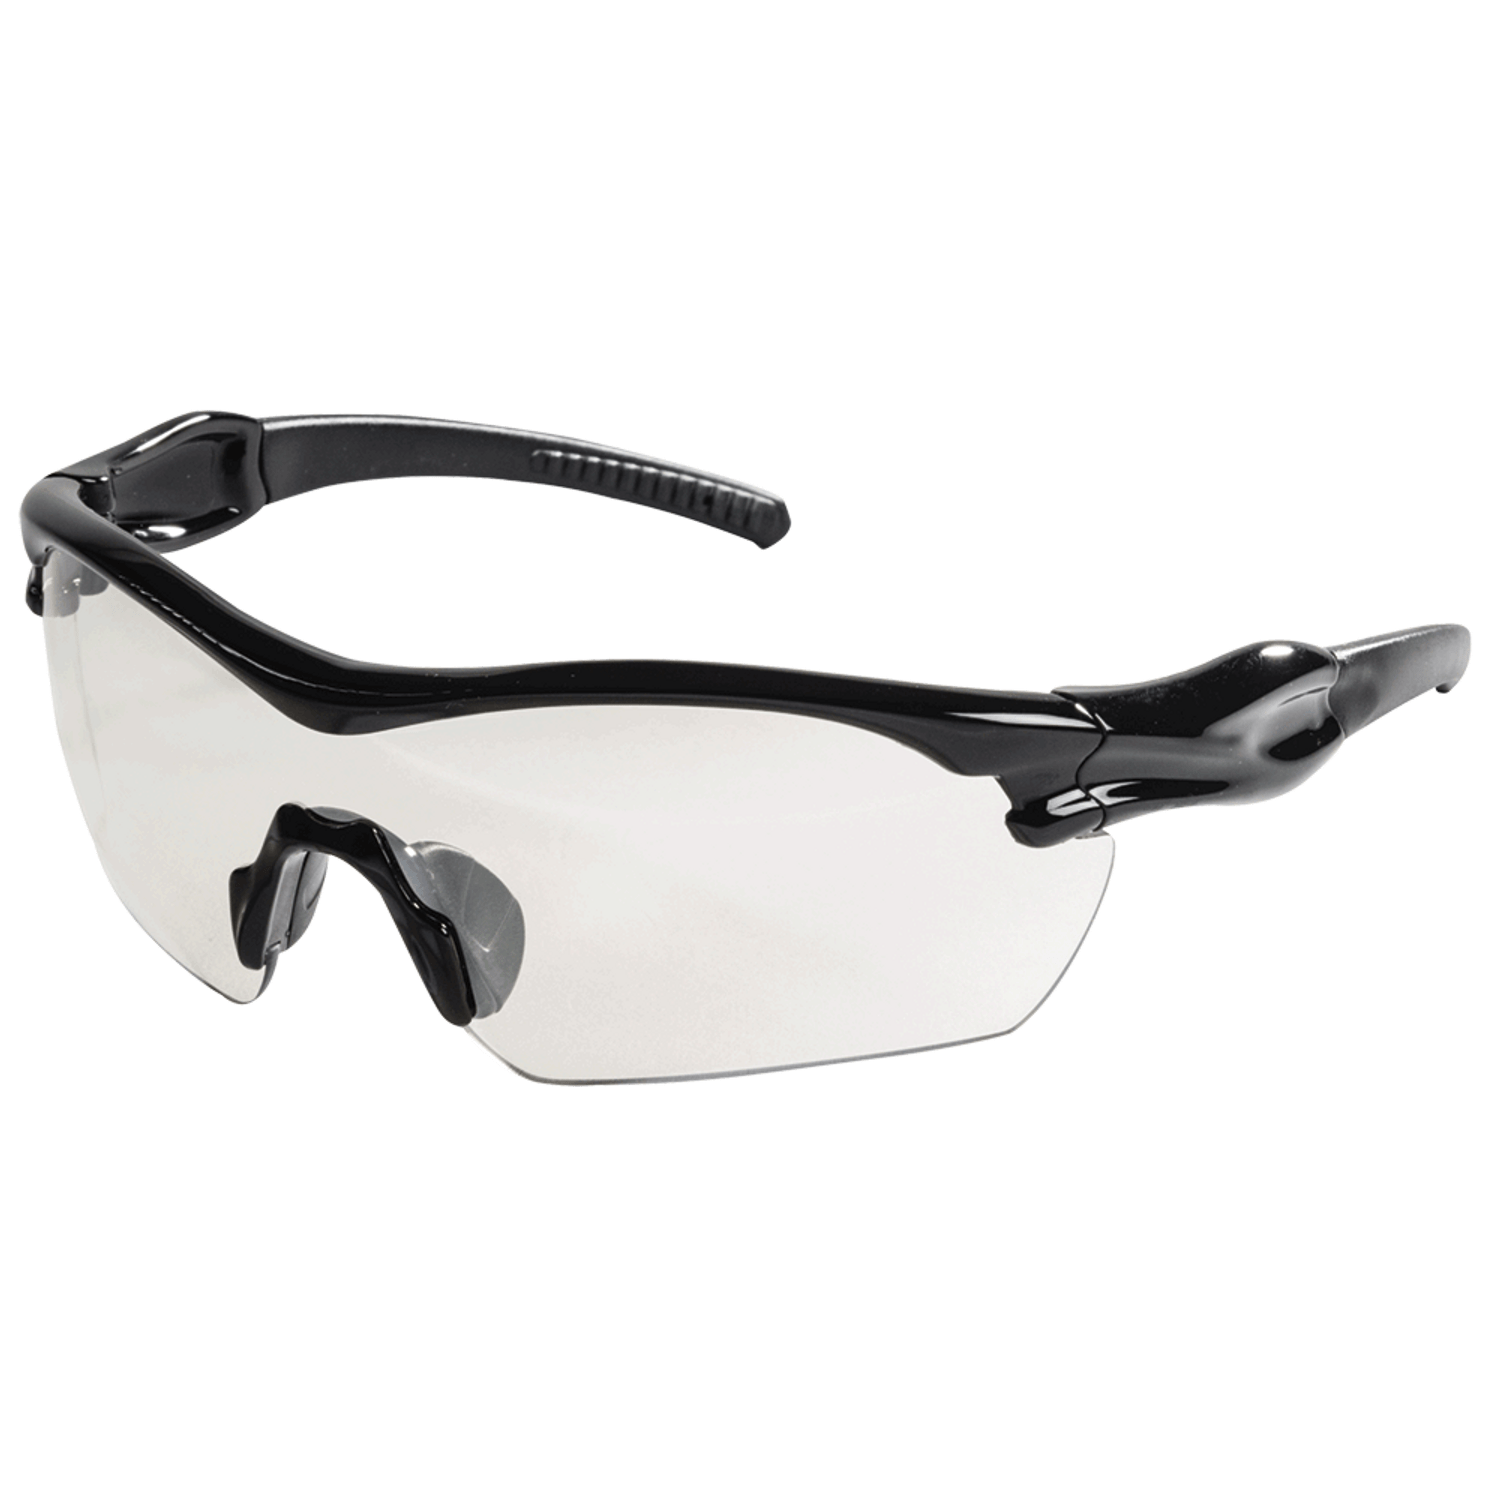 Sellstrom XP420 Safety Glasses - 1/0 Tint (12 Pack)